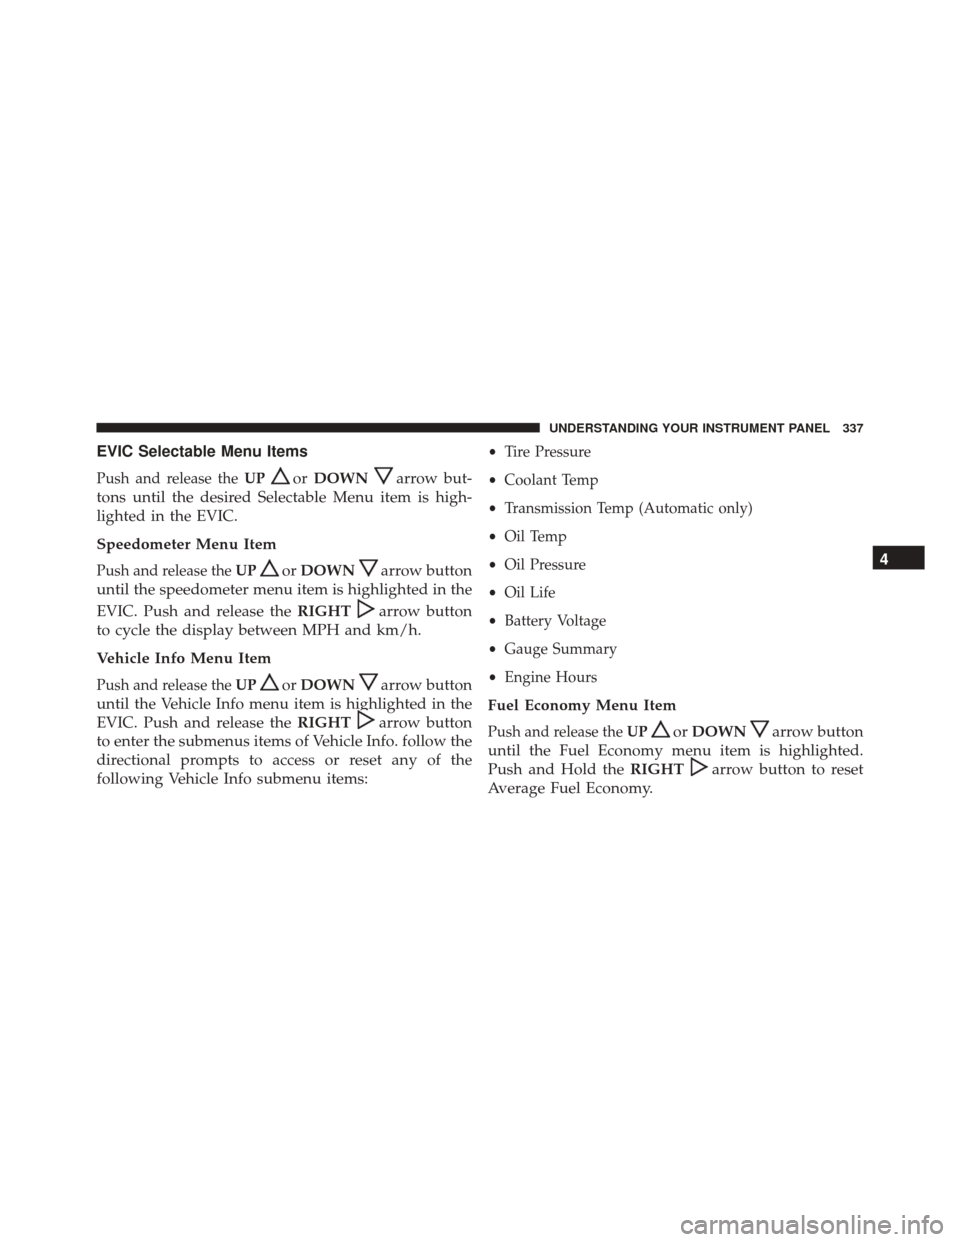 Ram 3500 2016 Owners Guide EVIC Selectable Menu Items
Push and release theUPorDOWNarrow but-
tons until the desired Selectable Menu item is high-
lighted in the EVIC.
Speedometer Menu Item
Push and release the UPorDOWNarrow but